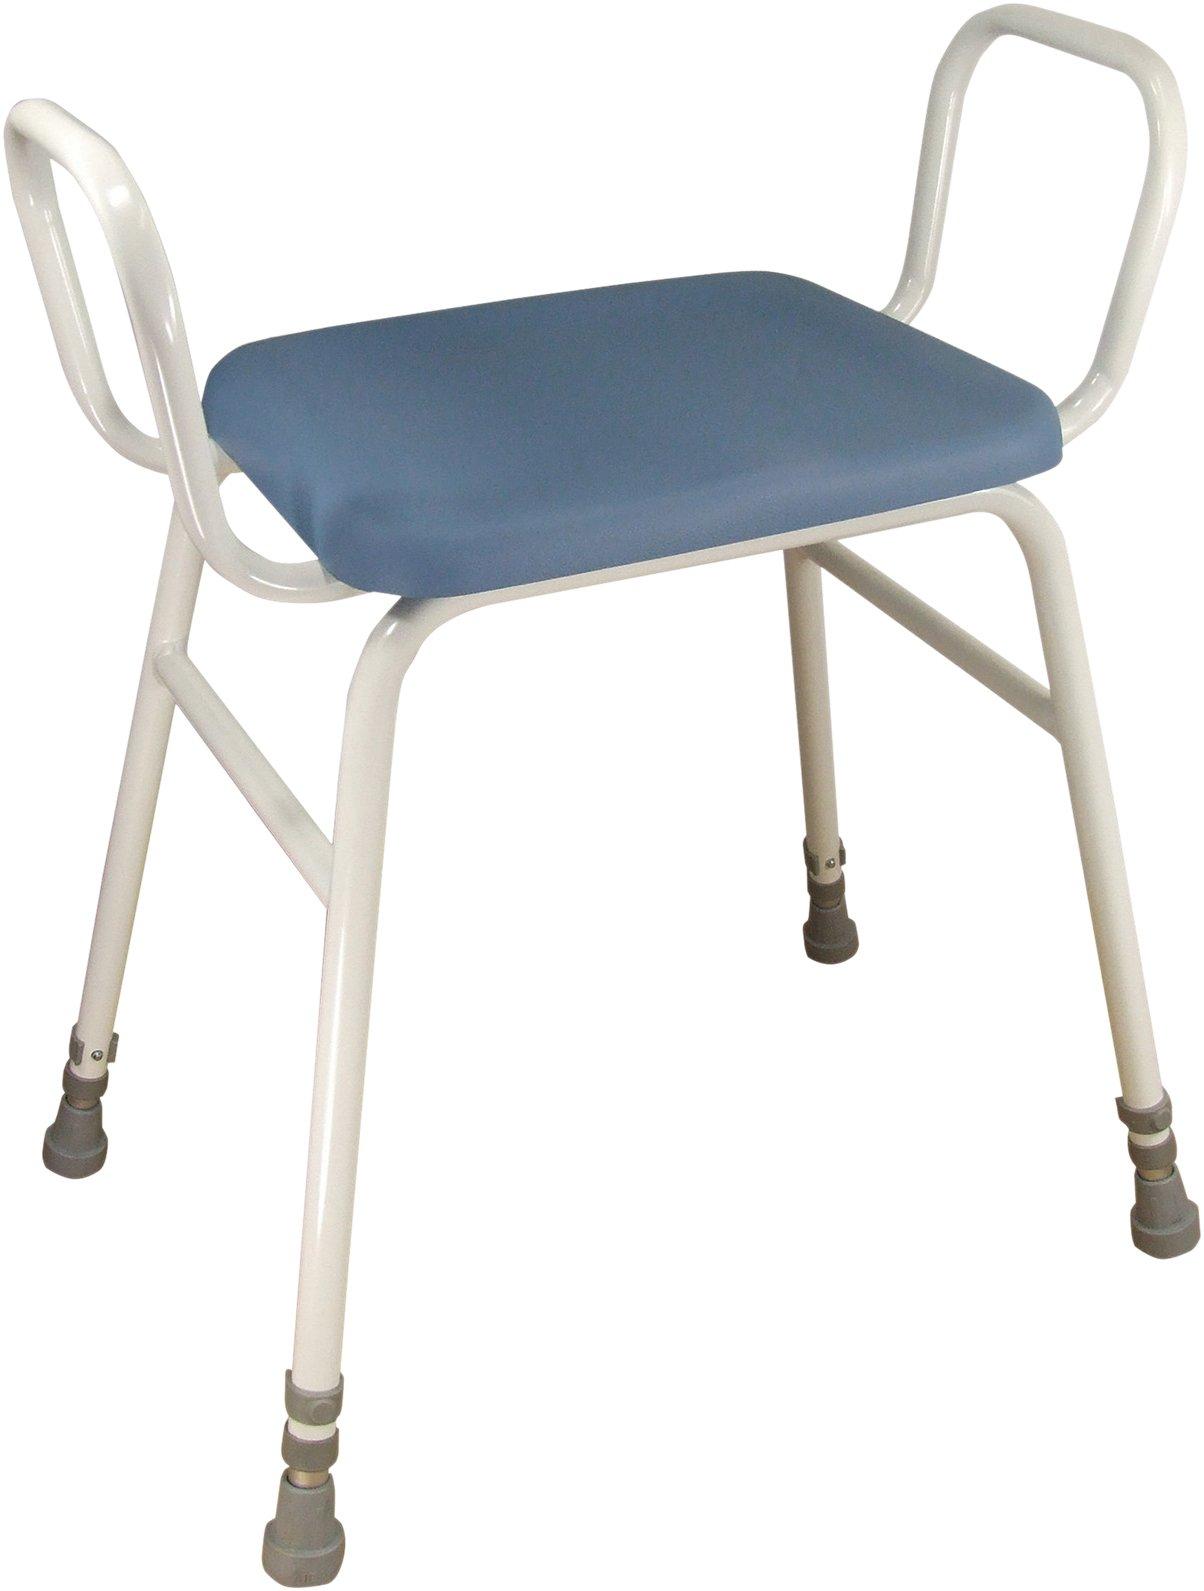 Astral Perching Stool with metal arms